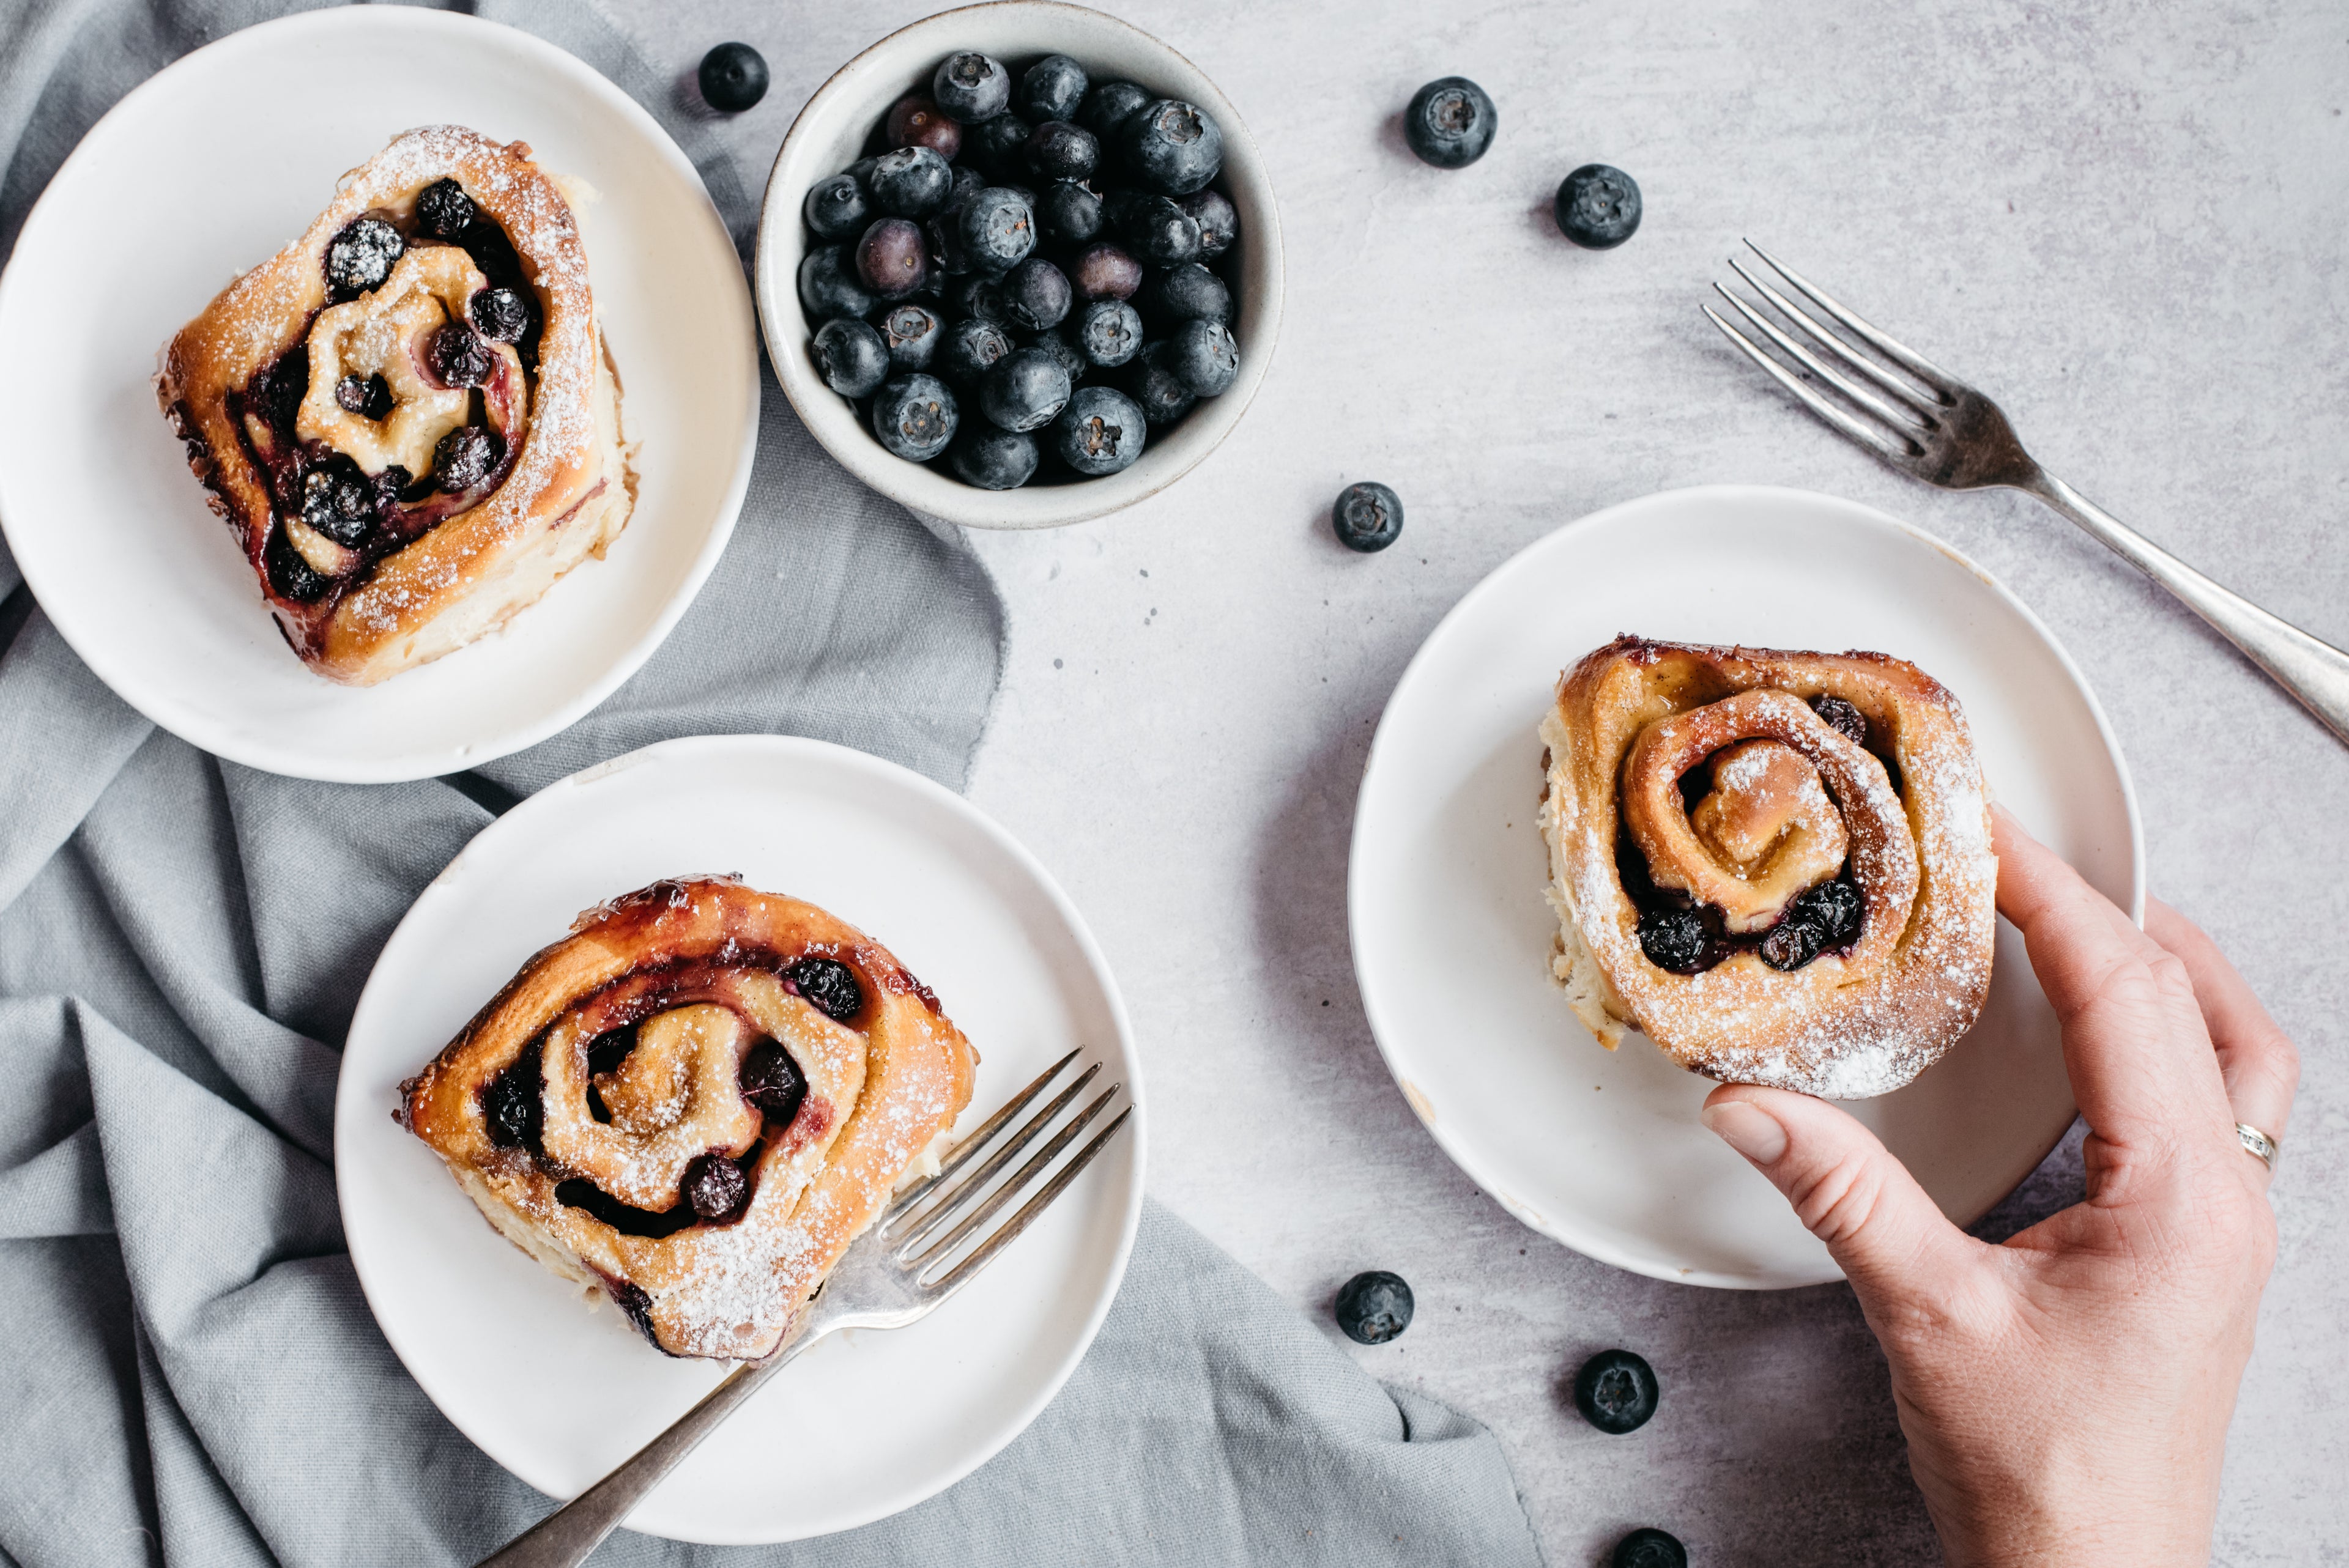 Three blueberry and vanilla rolls on plates, with forks and hand